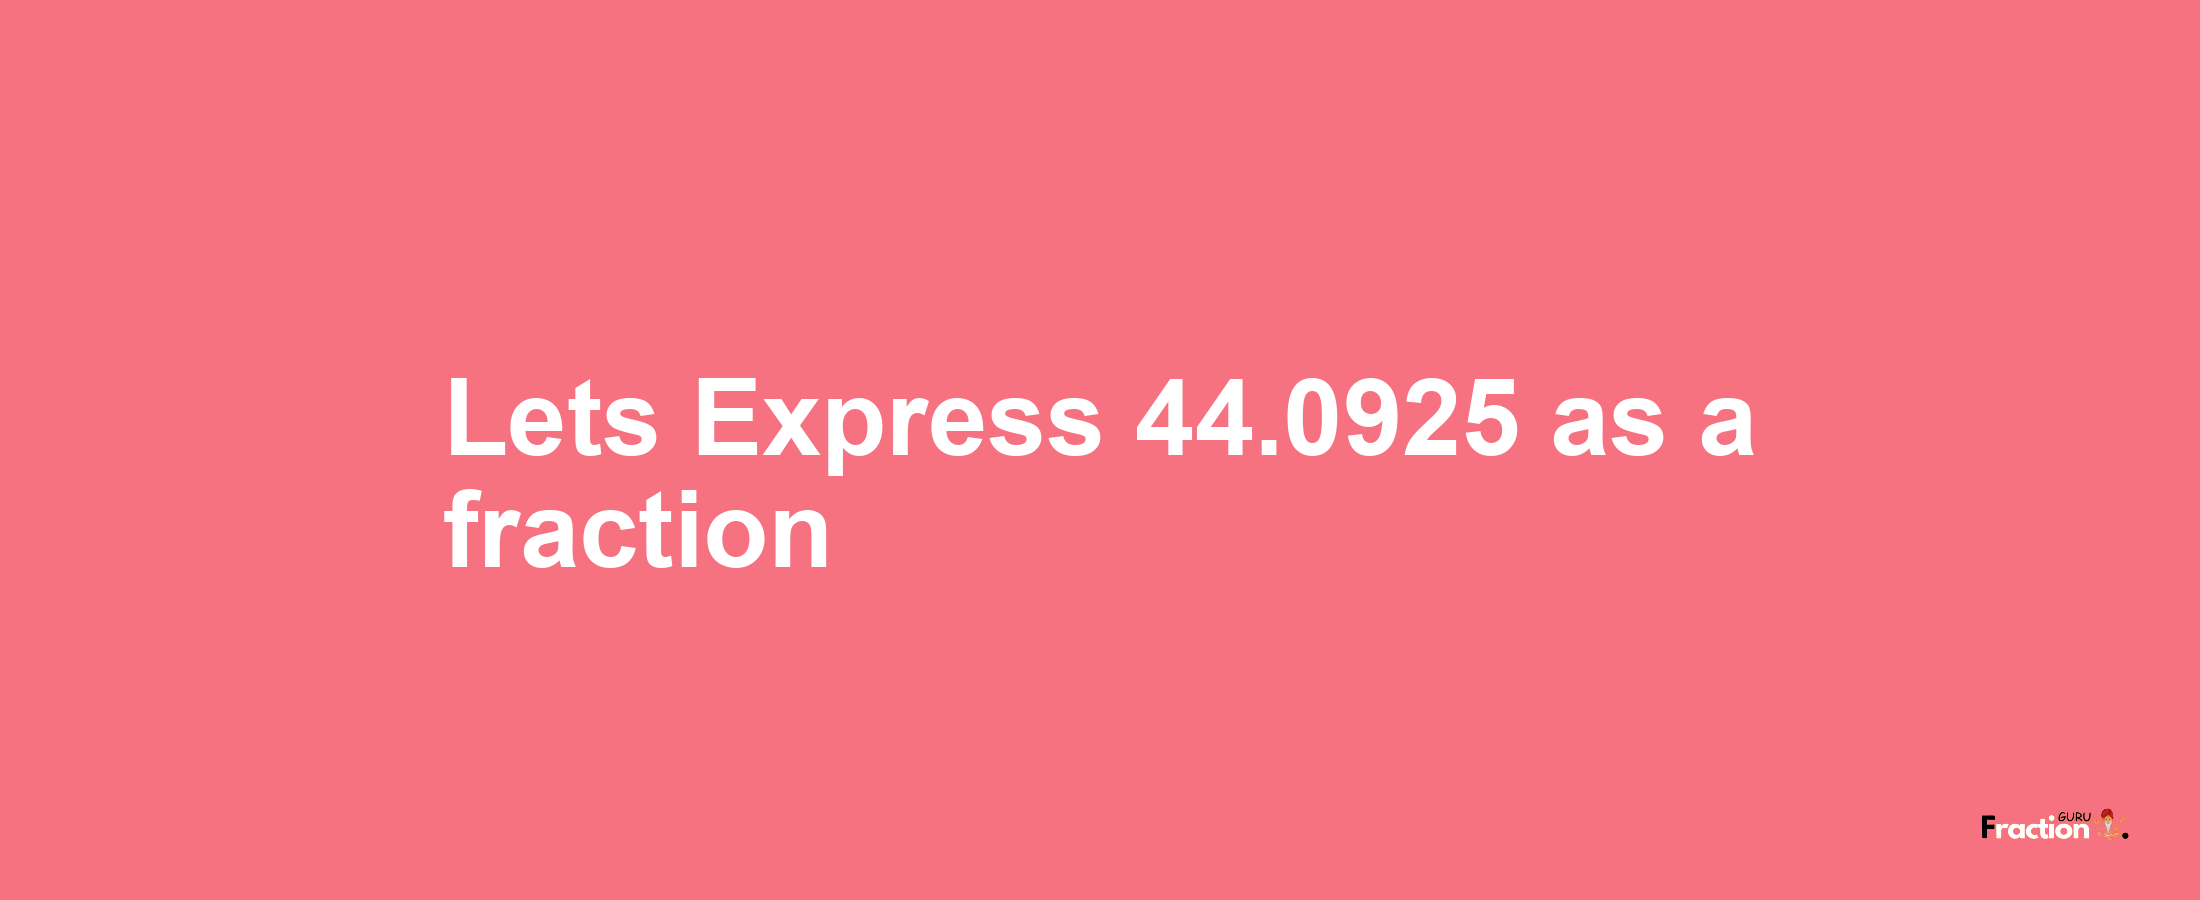 Lets Express 44.0925 as afraction